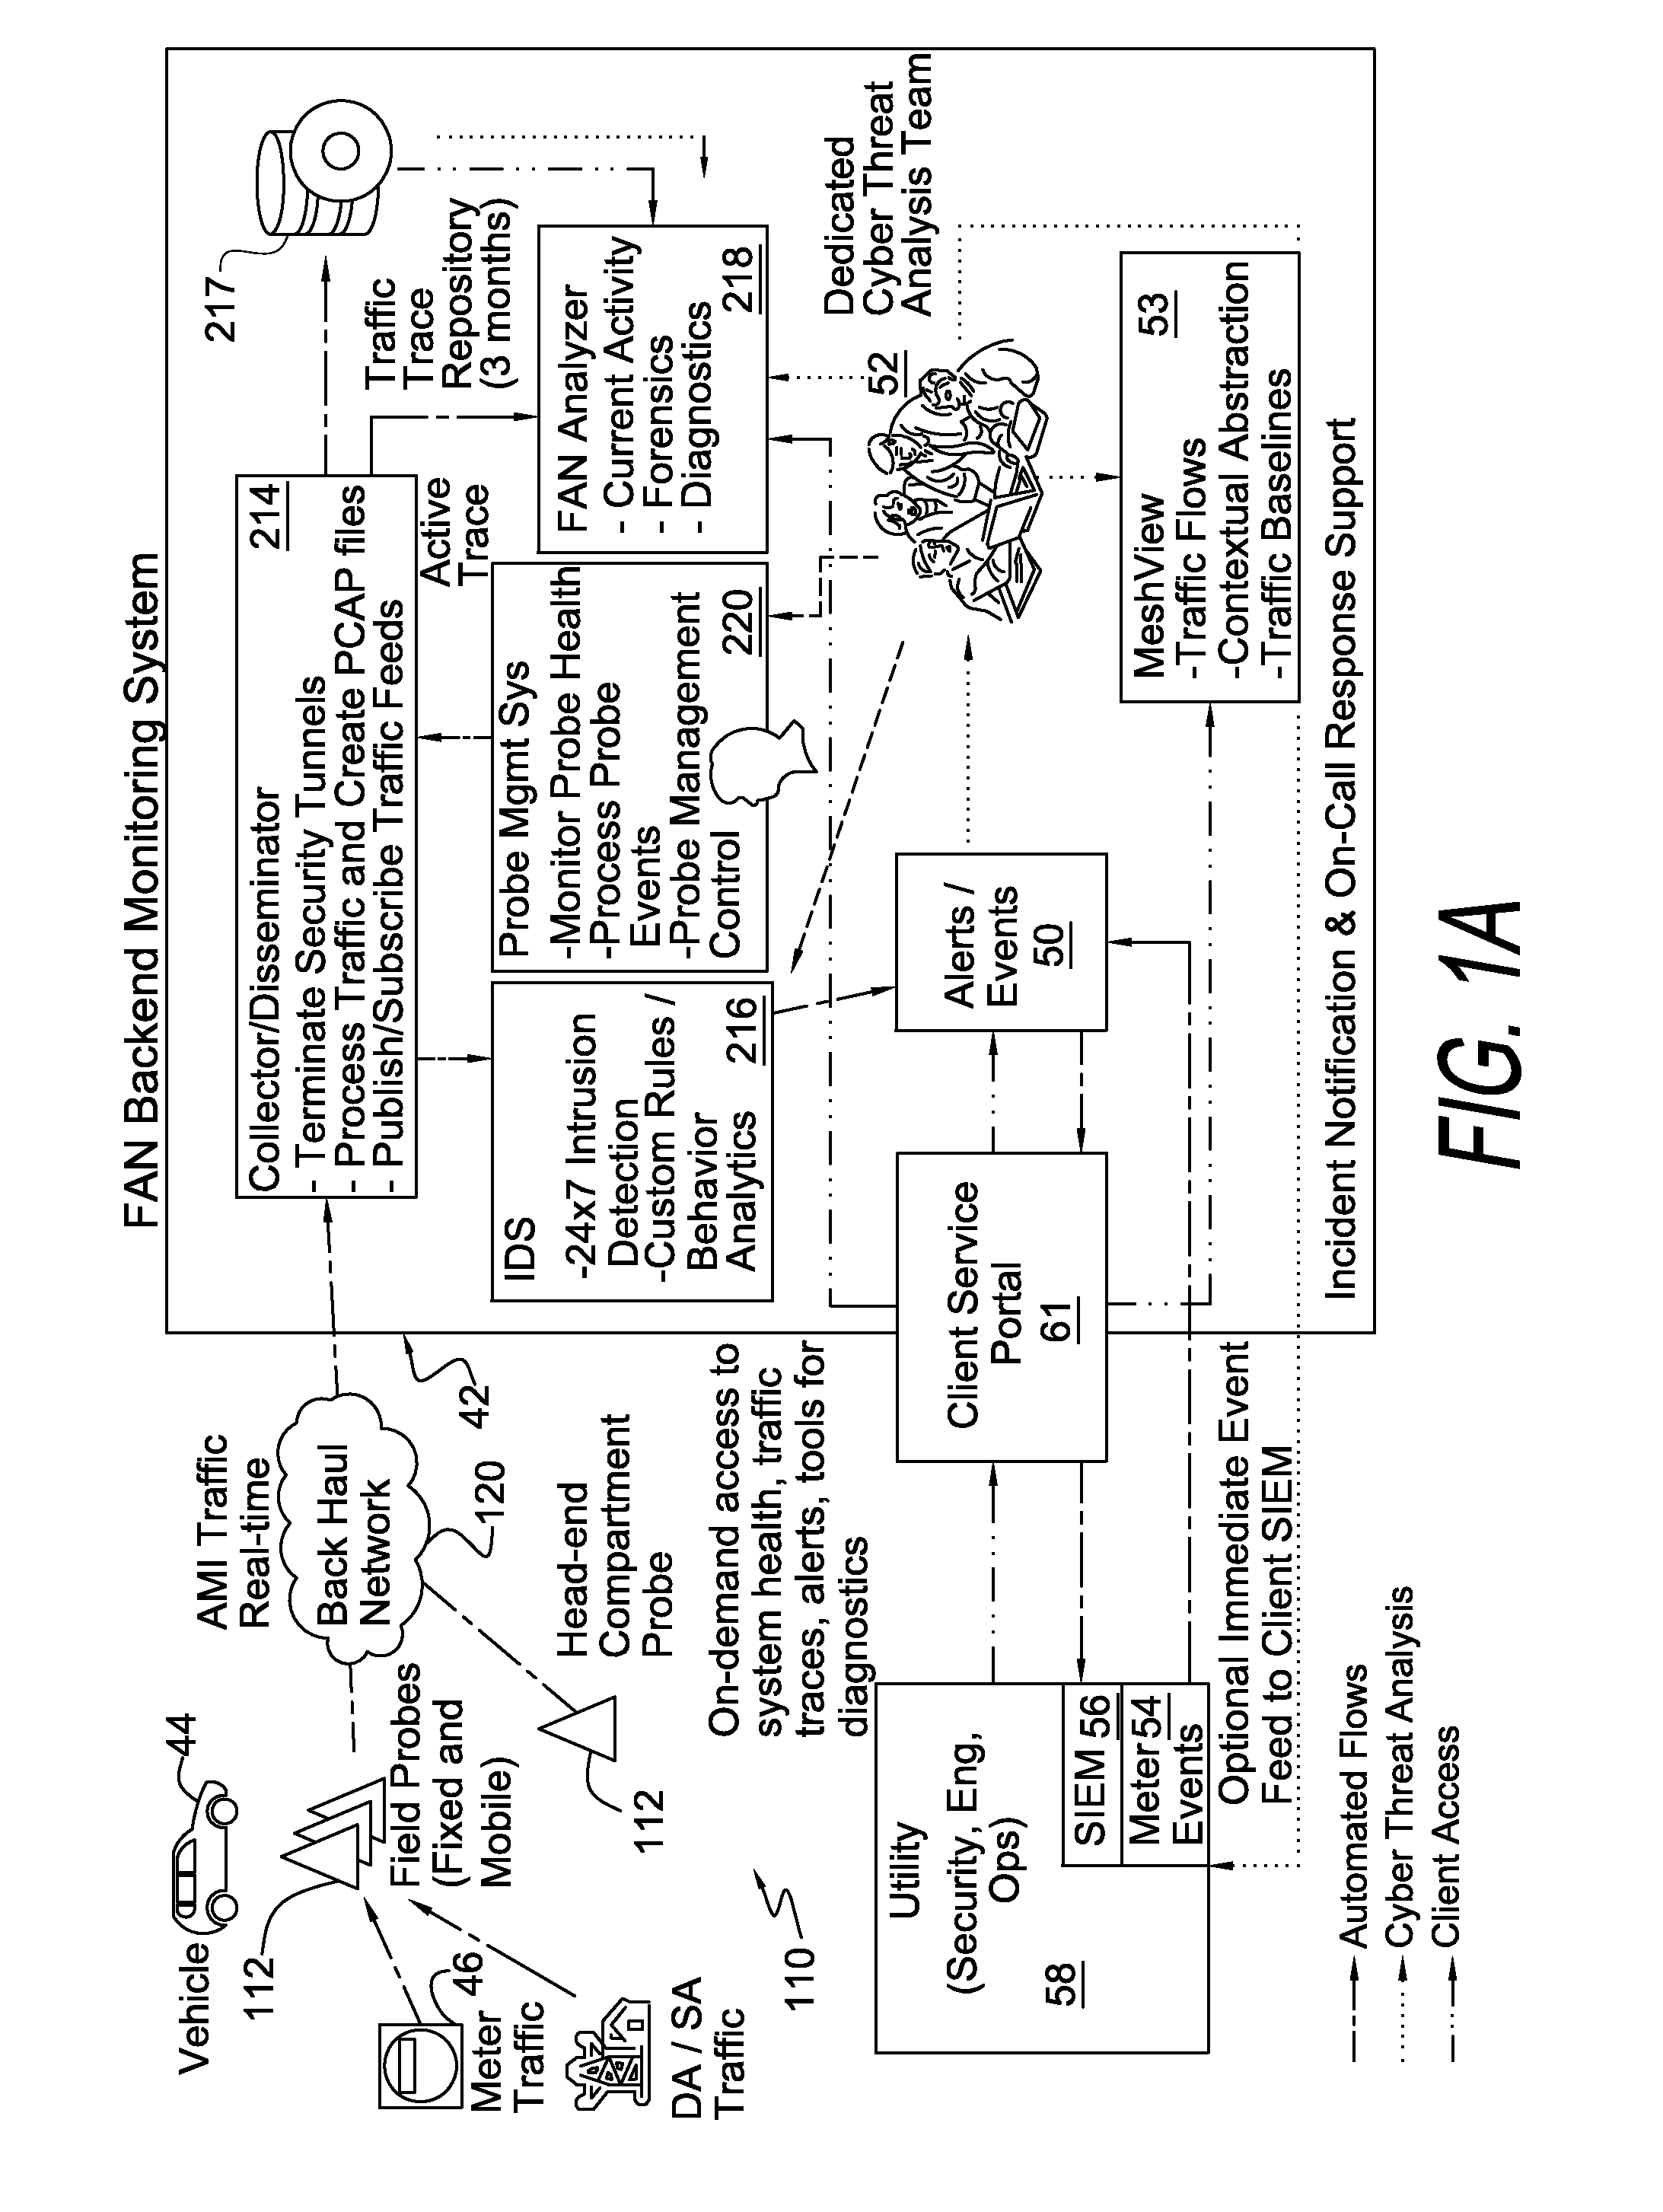 Method and system for packet acquisition, analysis and intrusion detection in field area networks